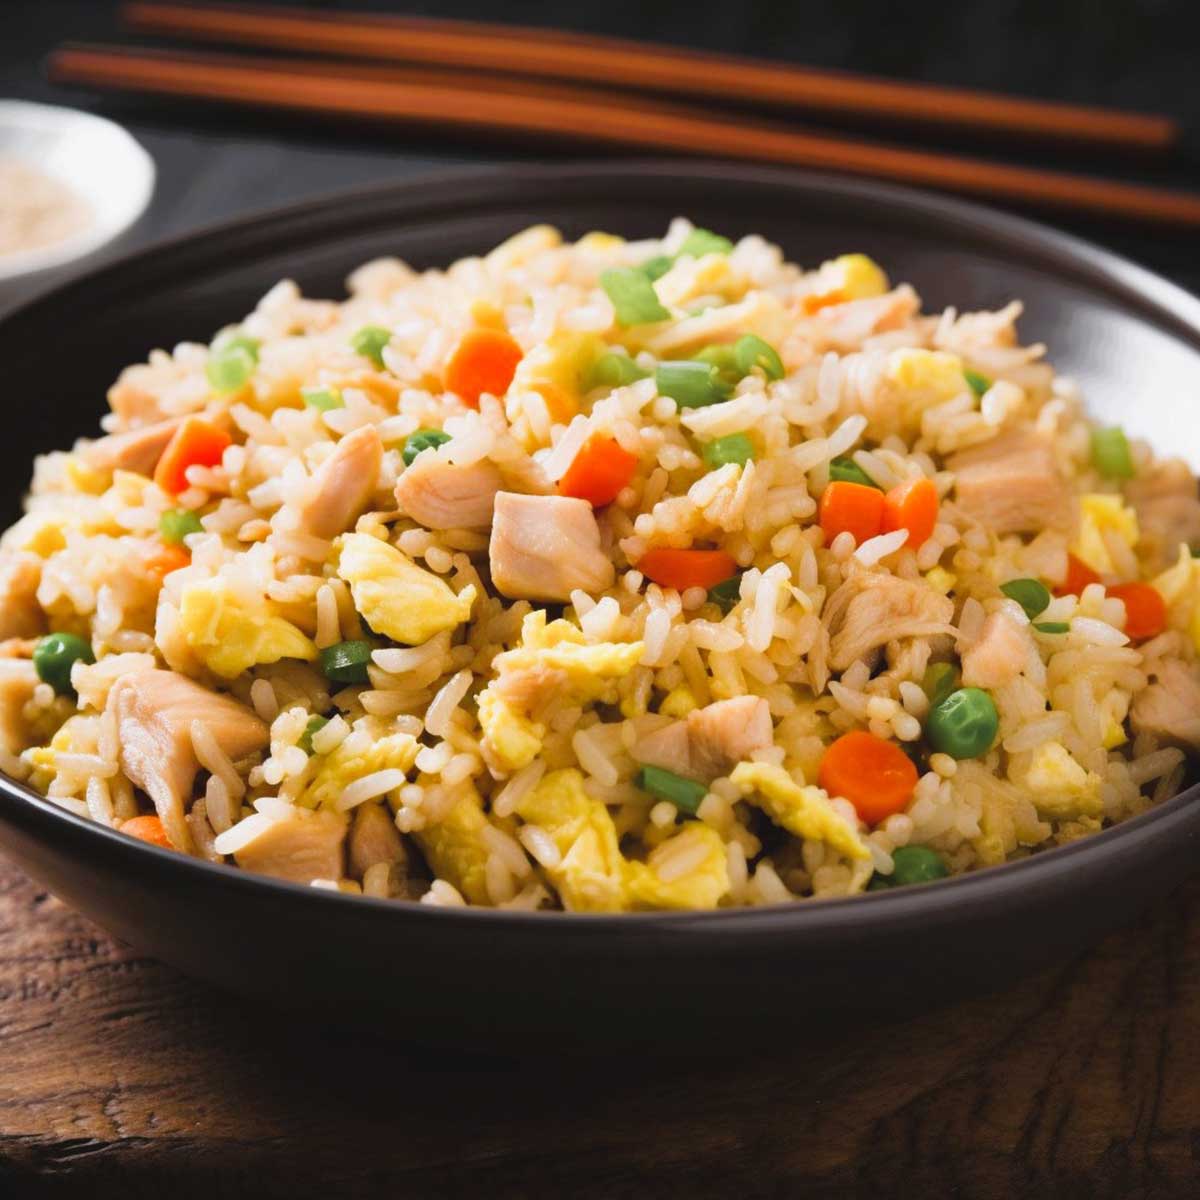 Large bowl of chicken fried rice.